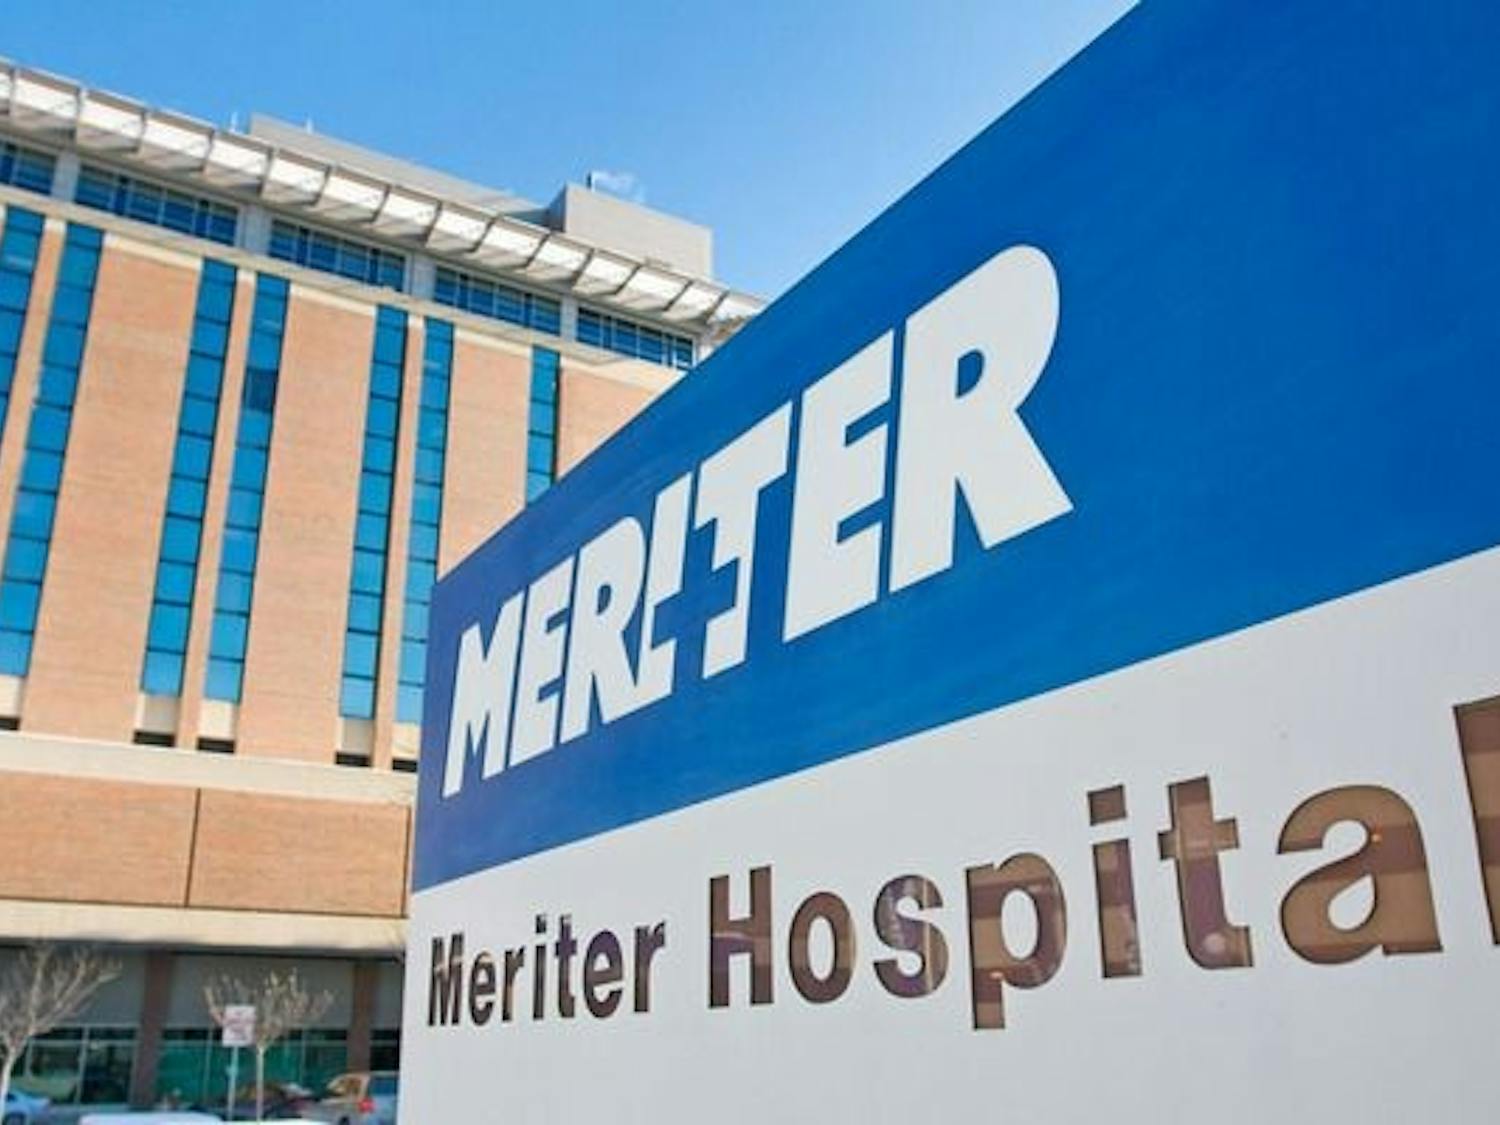 An agreement between UW Health and Meriter allowing patients to avoid overcrowded hospital stays could be finalized as early as this summer.